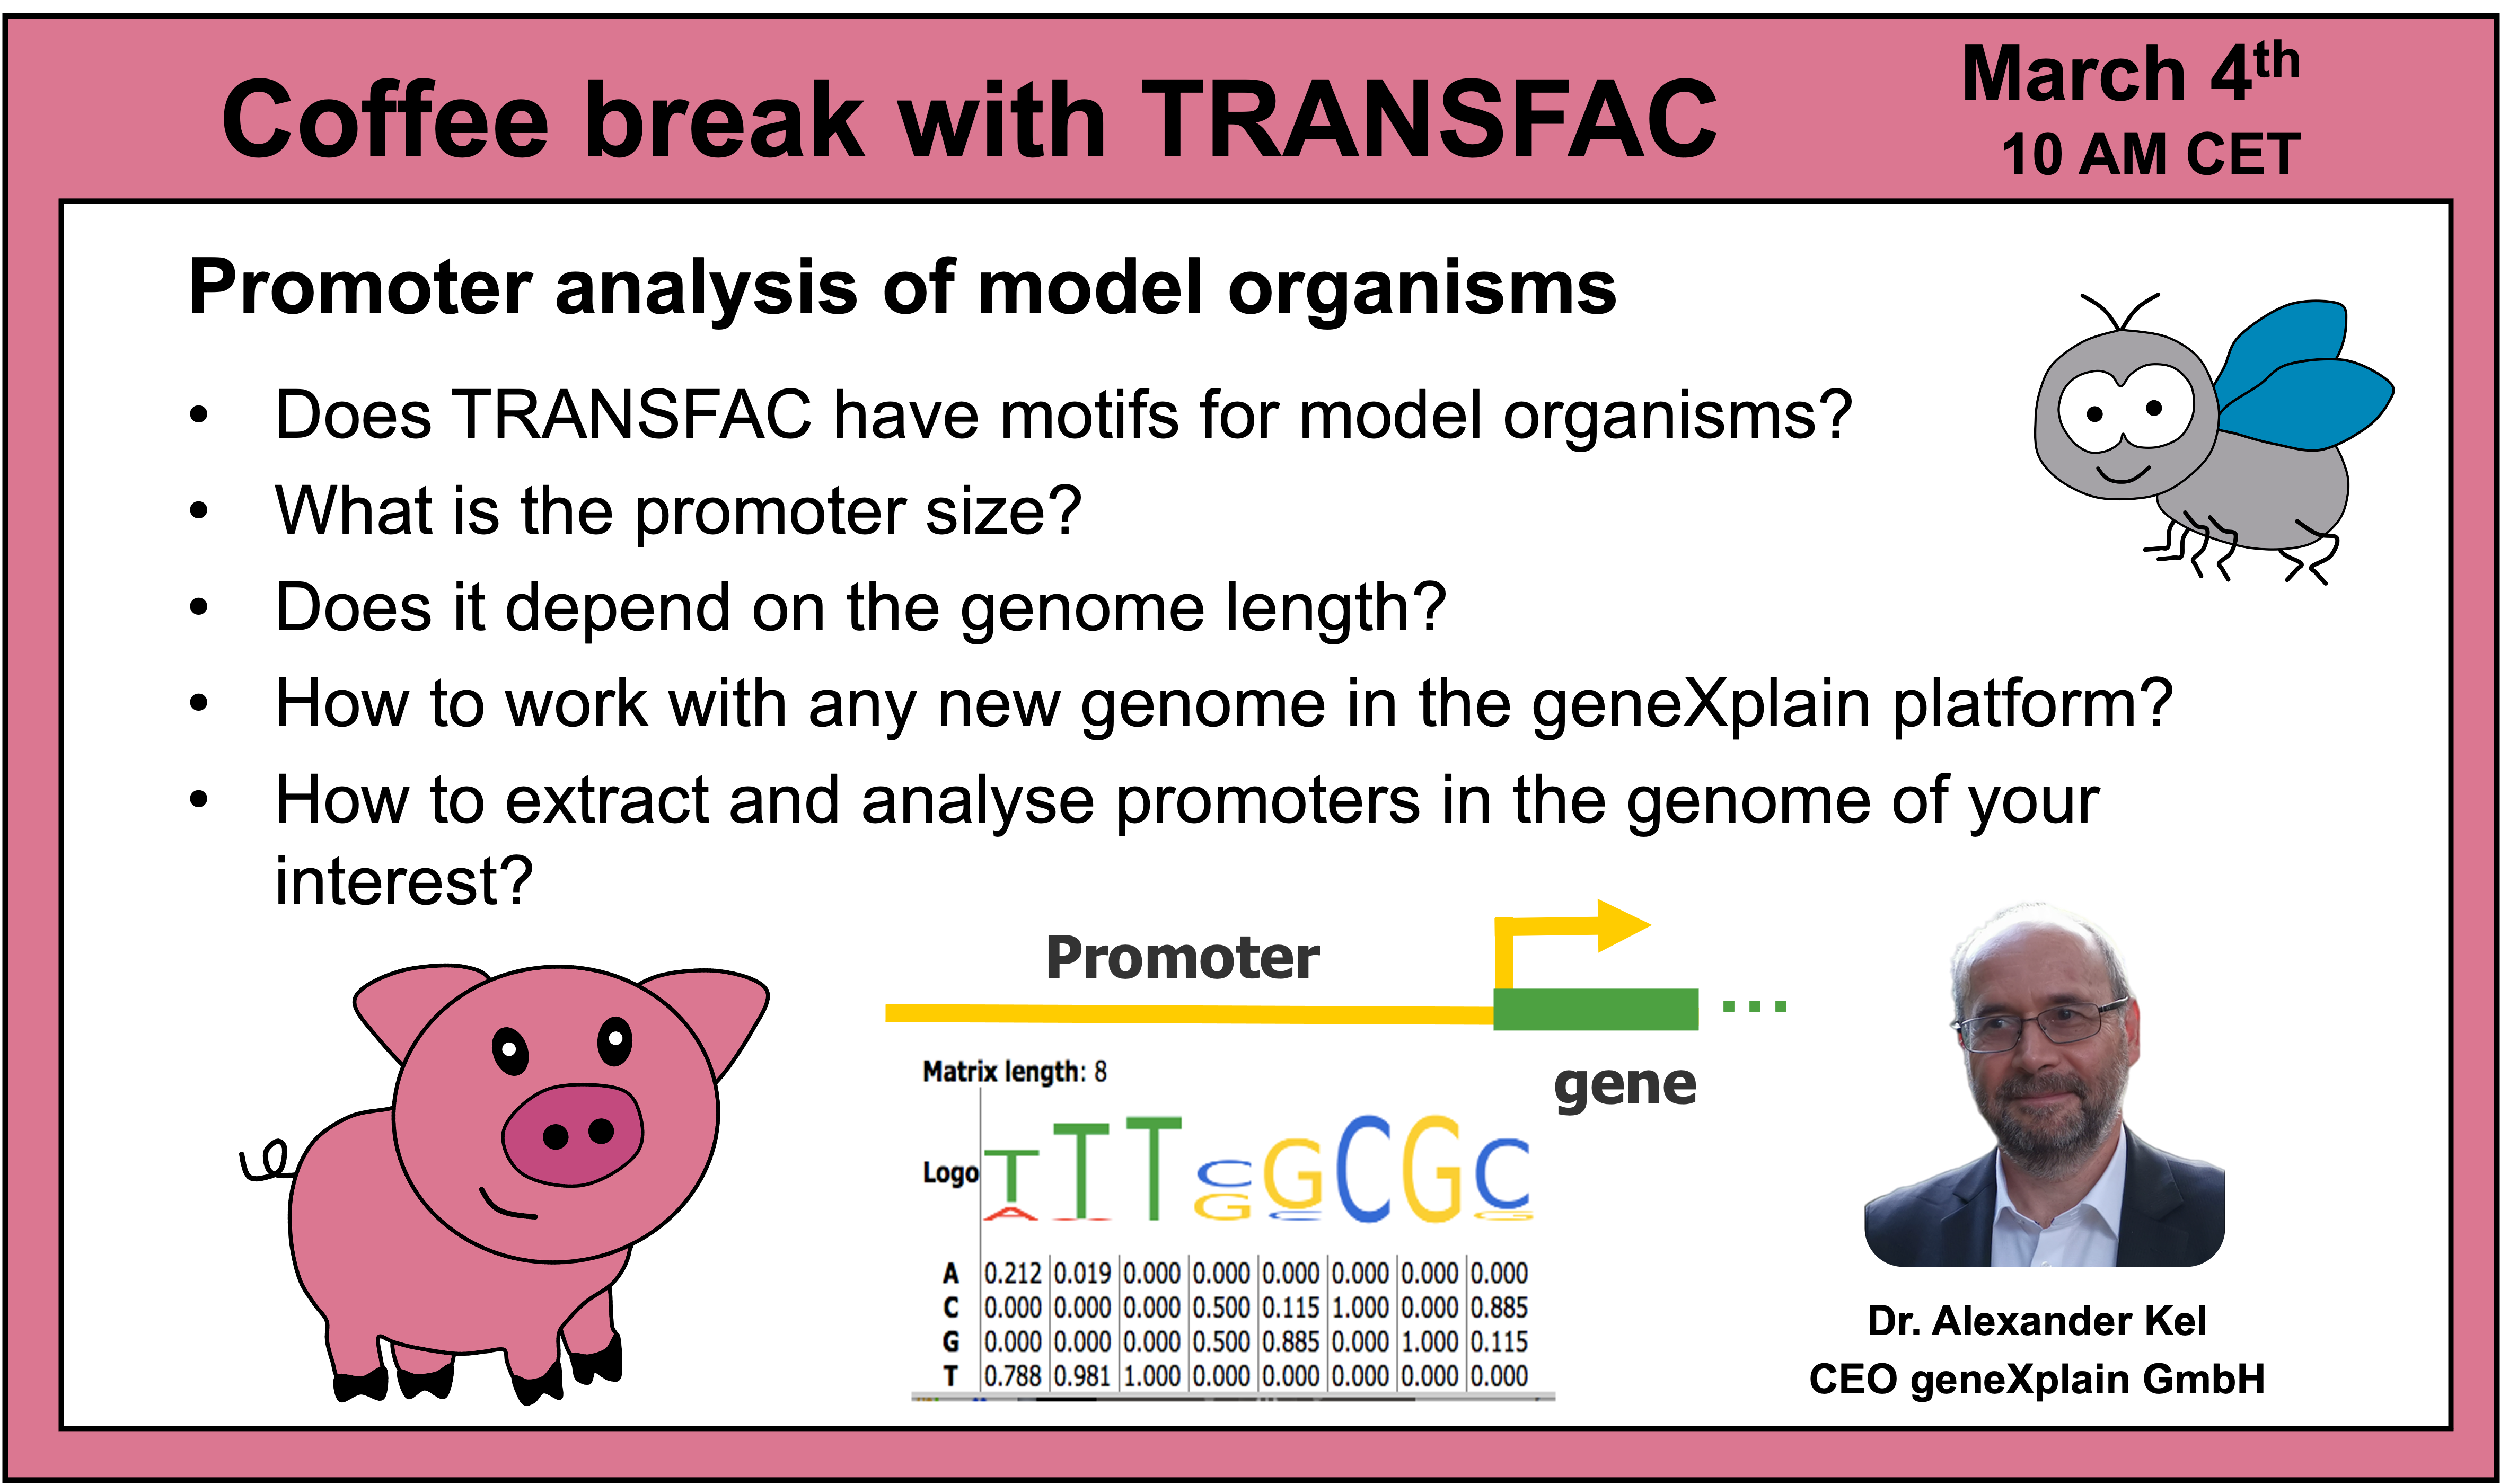 Promoter analysis of model organisms (part 1)